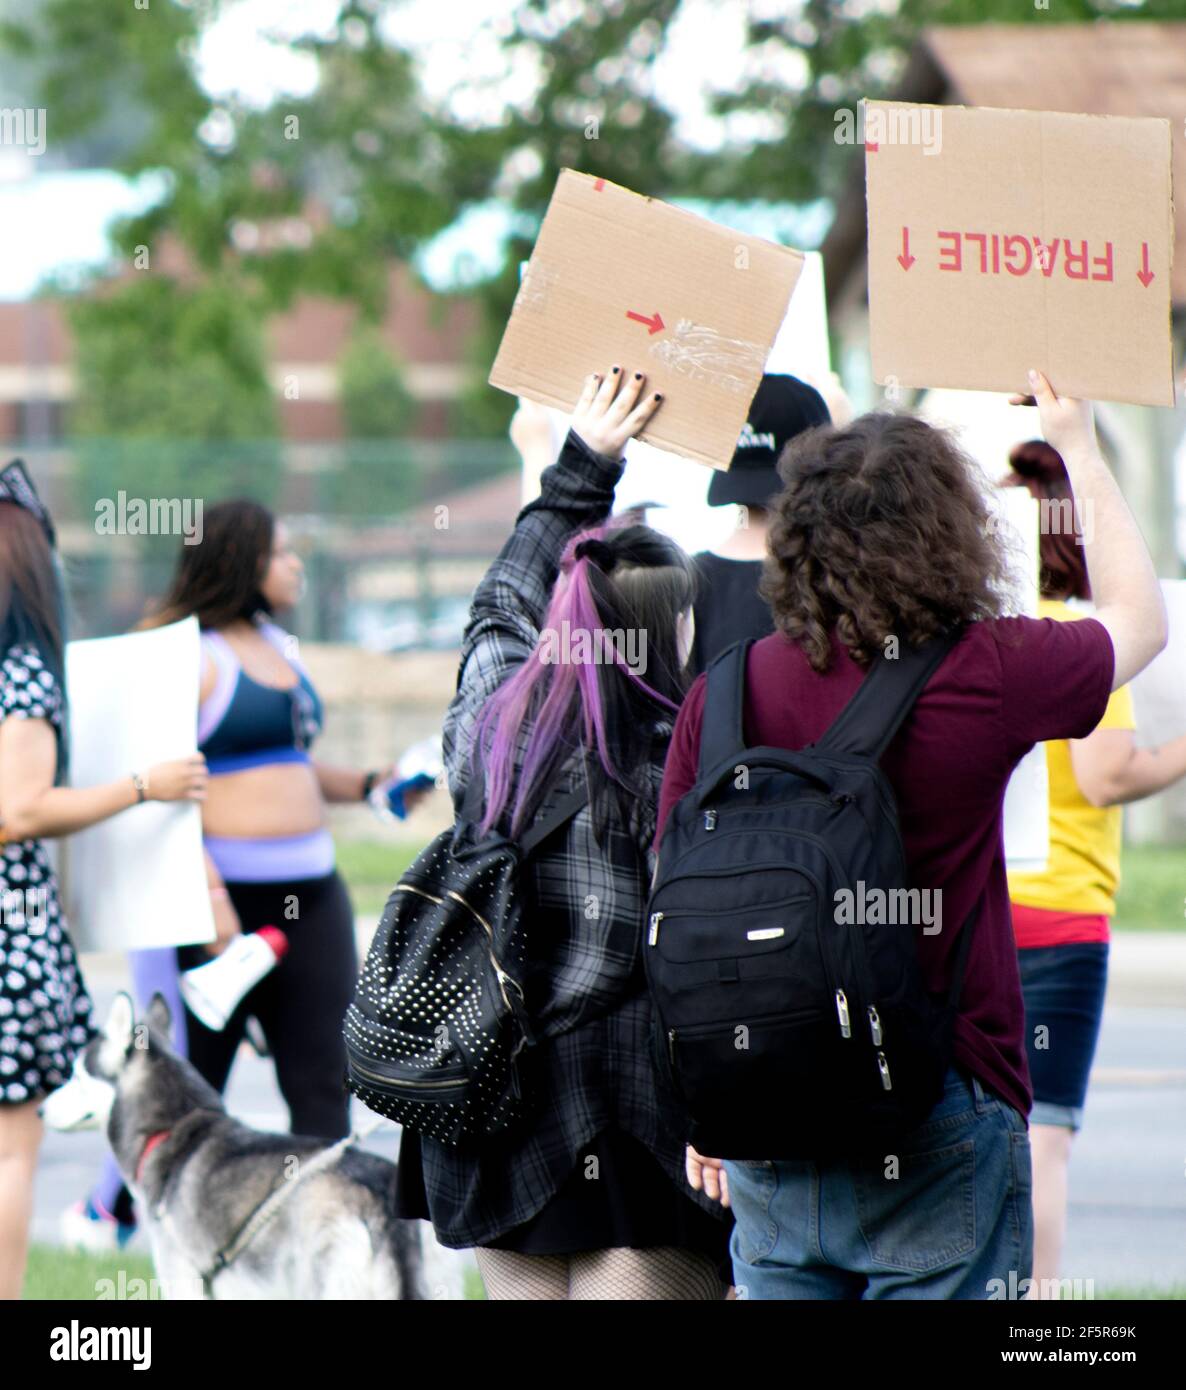 Young people participating in silent, peaceful protest along the street with cardboard signs and posters Stock Photo